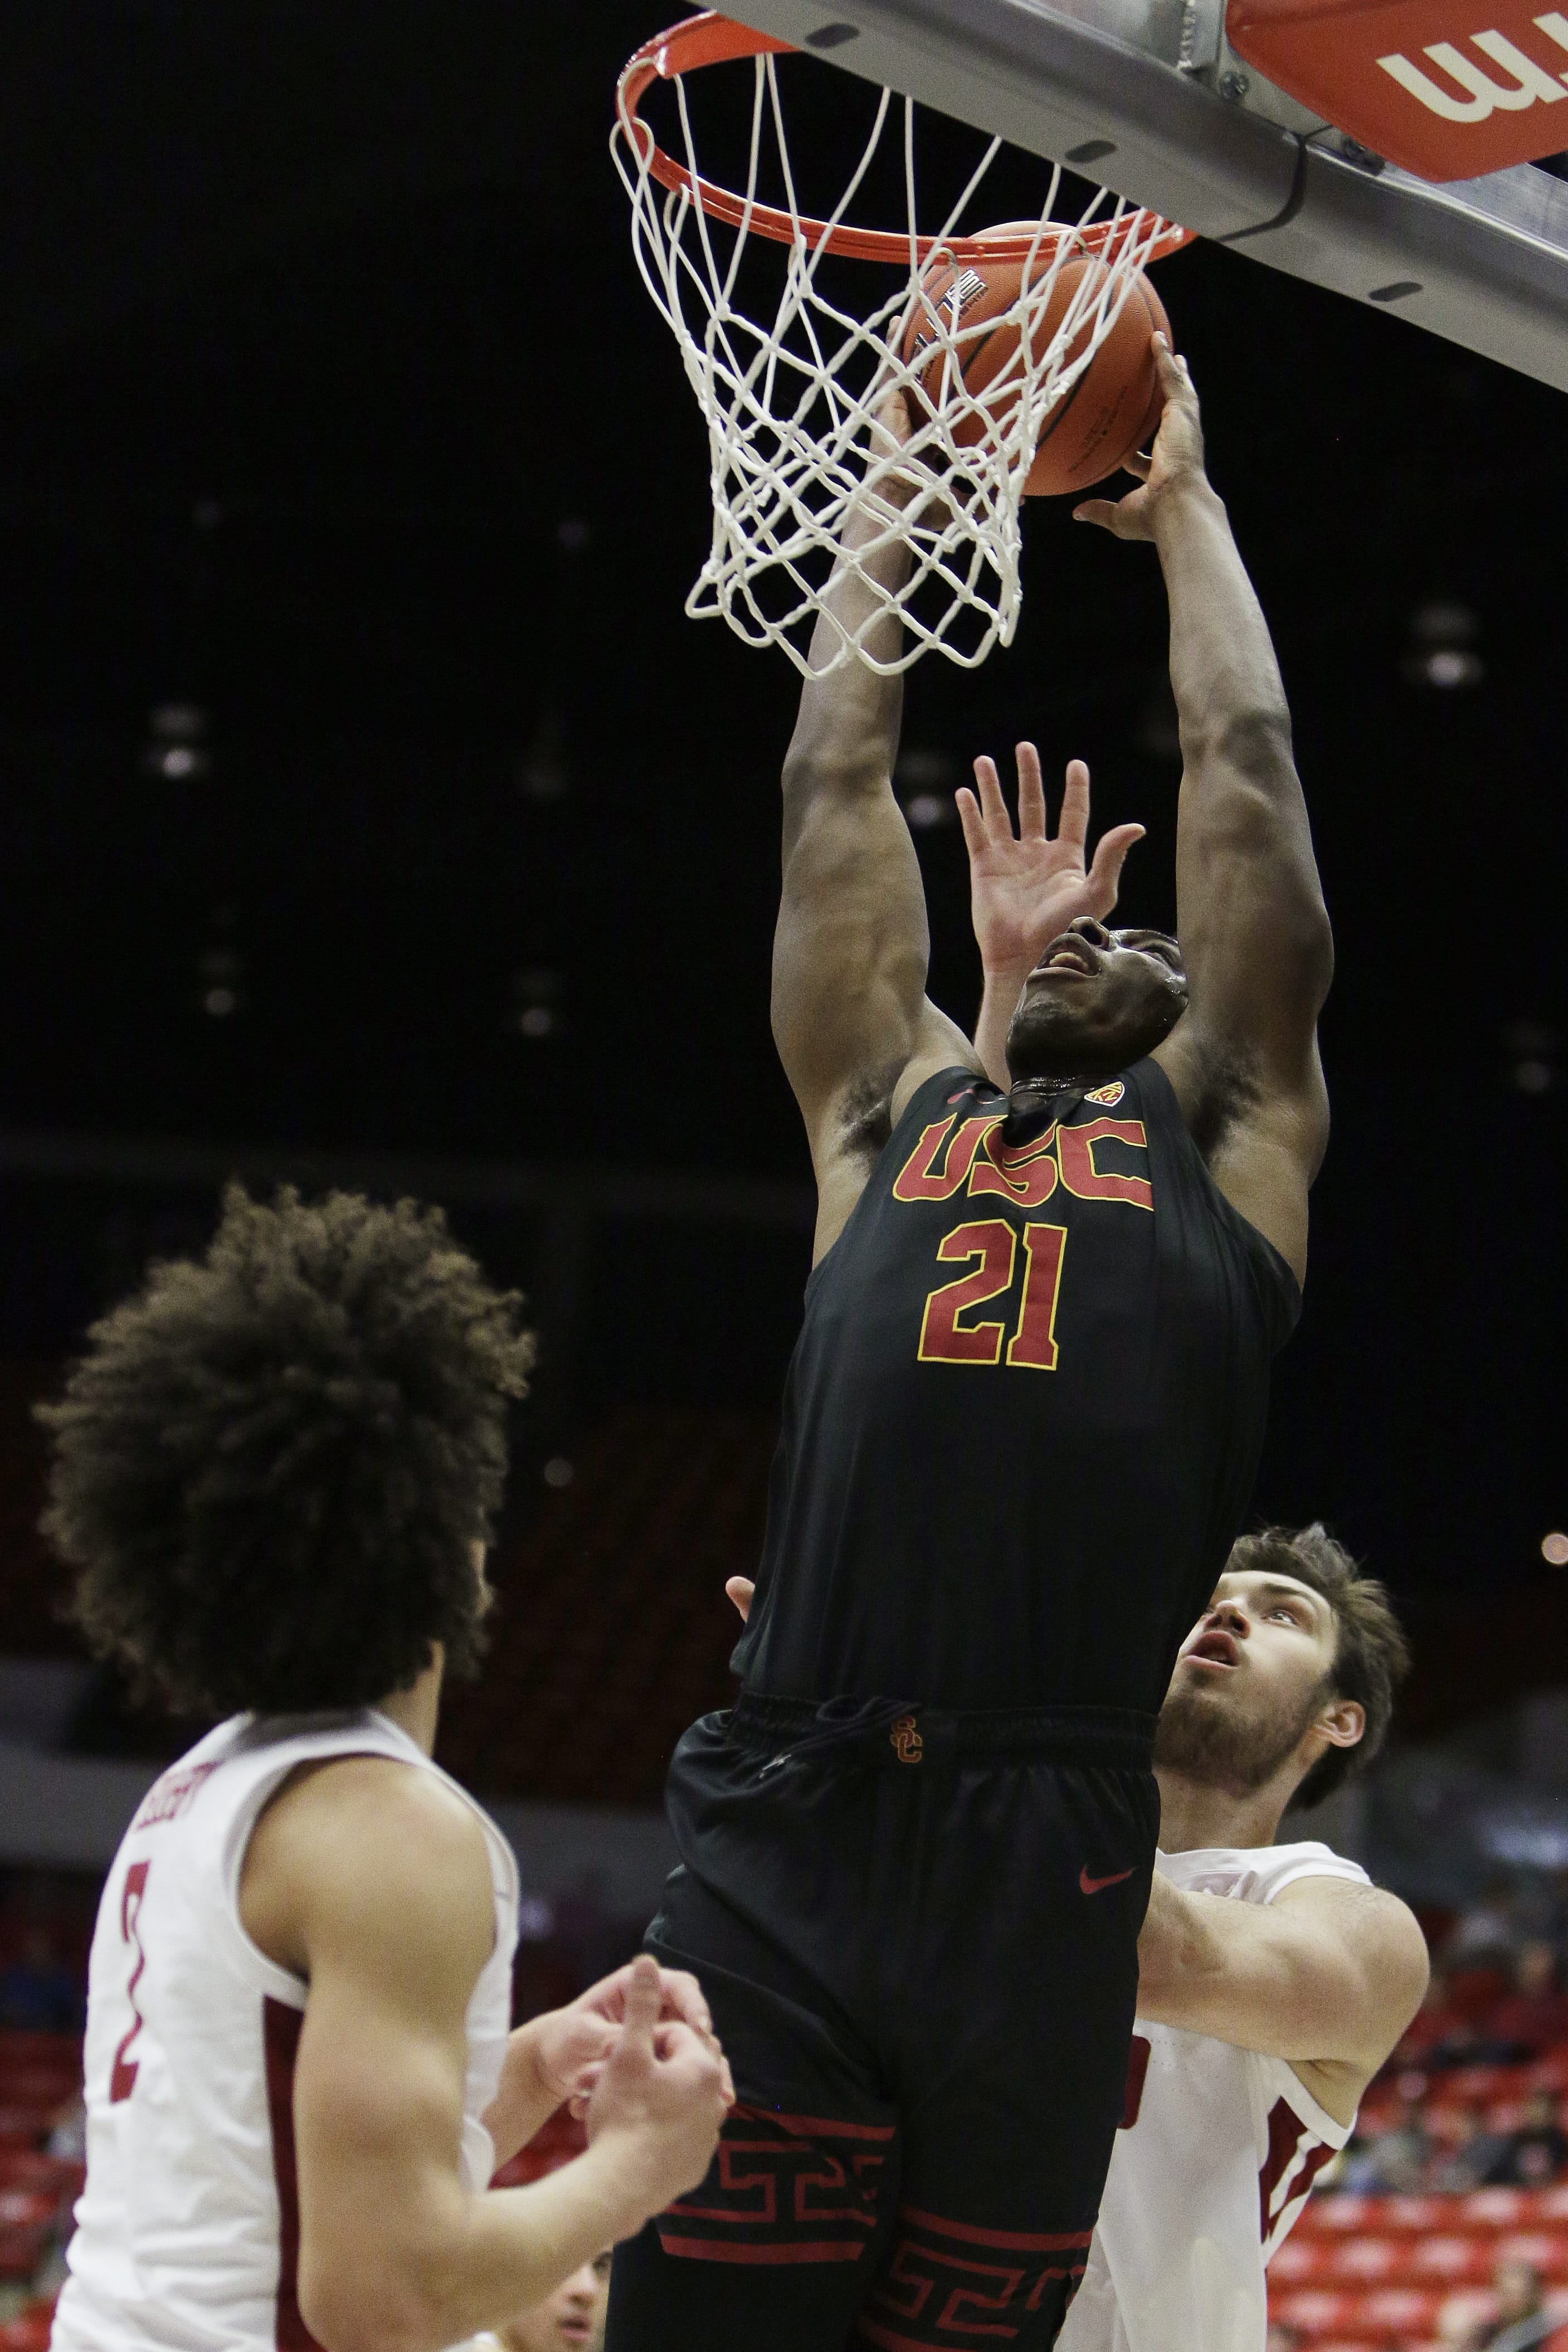 Southern California forward Onyeka Okongwu, center, goes up for a dunk between Washington State forward CJ Elleby, left, and center Volodymyr Markovetskyy during the first half of an NCAA college basketball game in Pullman, Wash., Thursday, Jan. 2, 2020.